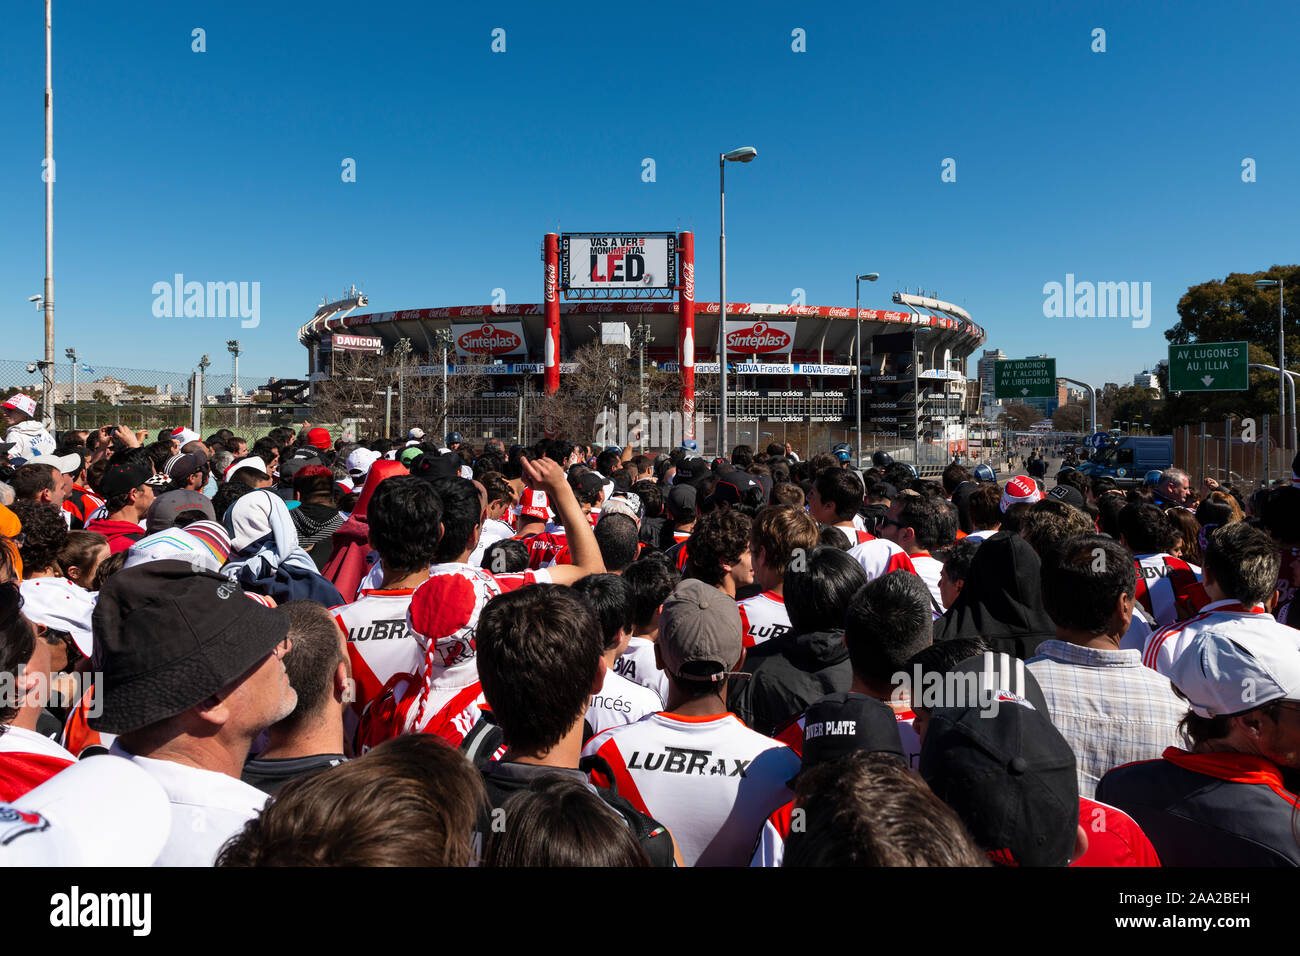 Buenos Aires, Argentina - October 6, 2013: River Plate supporters wait to enter the Estadio Monumental Antonio Vespucio Liberti for a soccer game in t Stock Photo